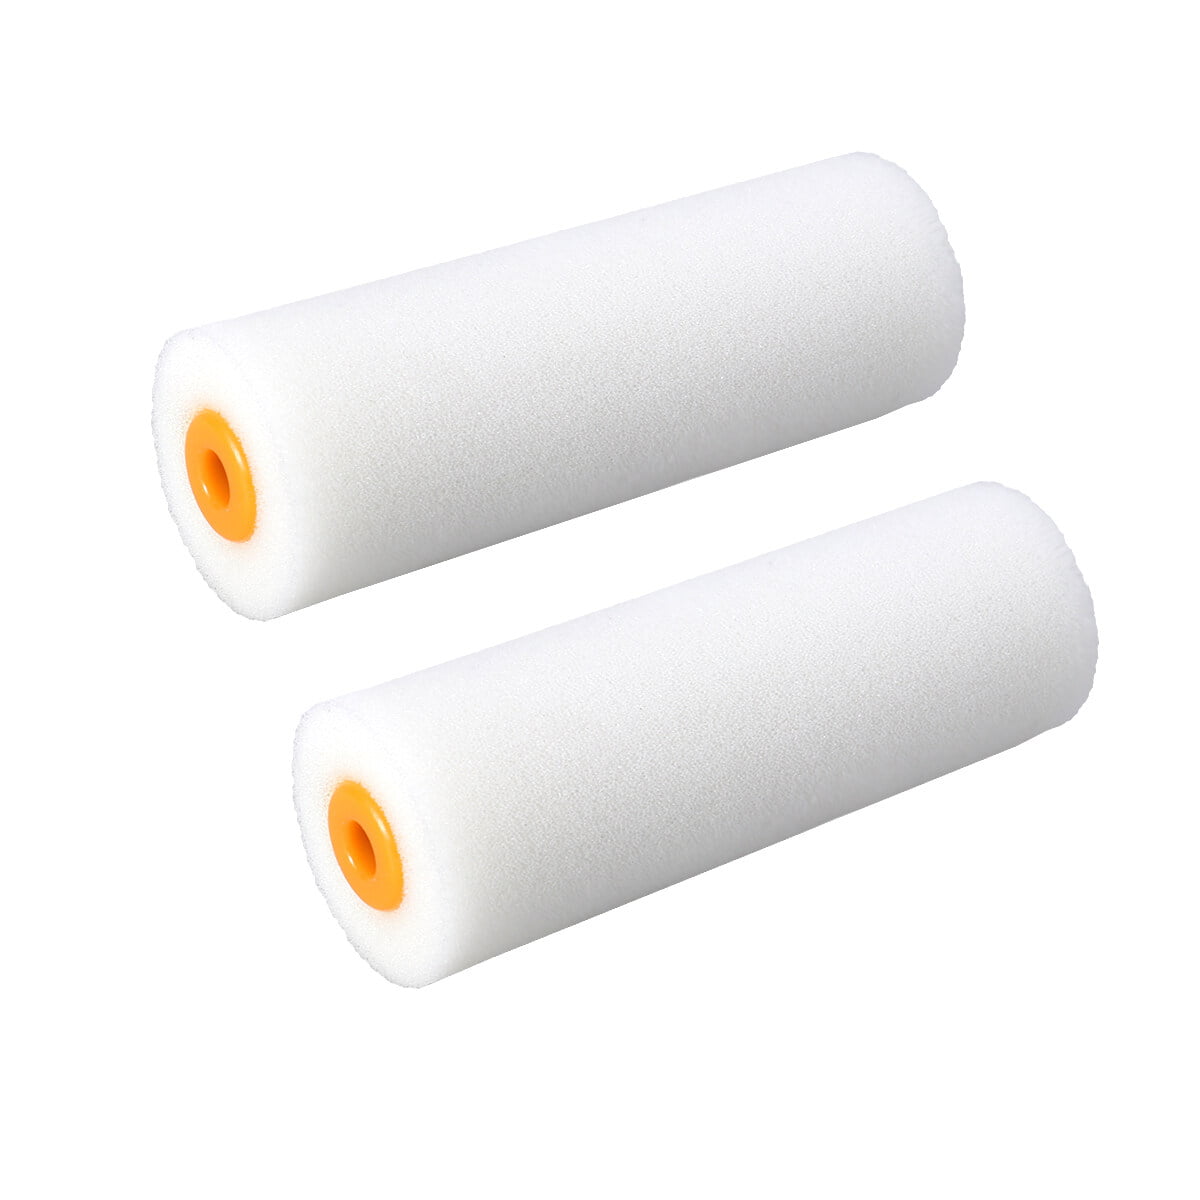 6pcs For Crafting 2.2 And 4 Inch Roller Vinyl Roller Tool For